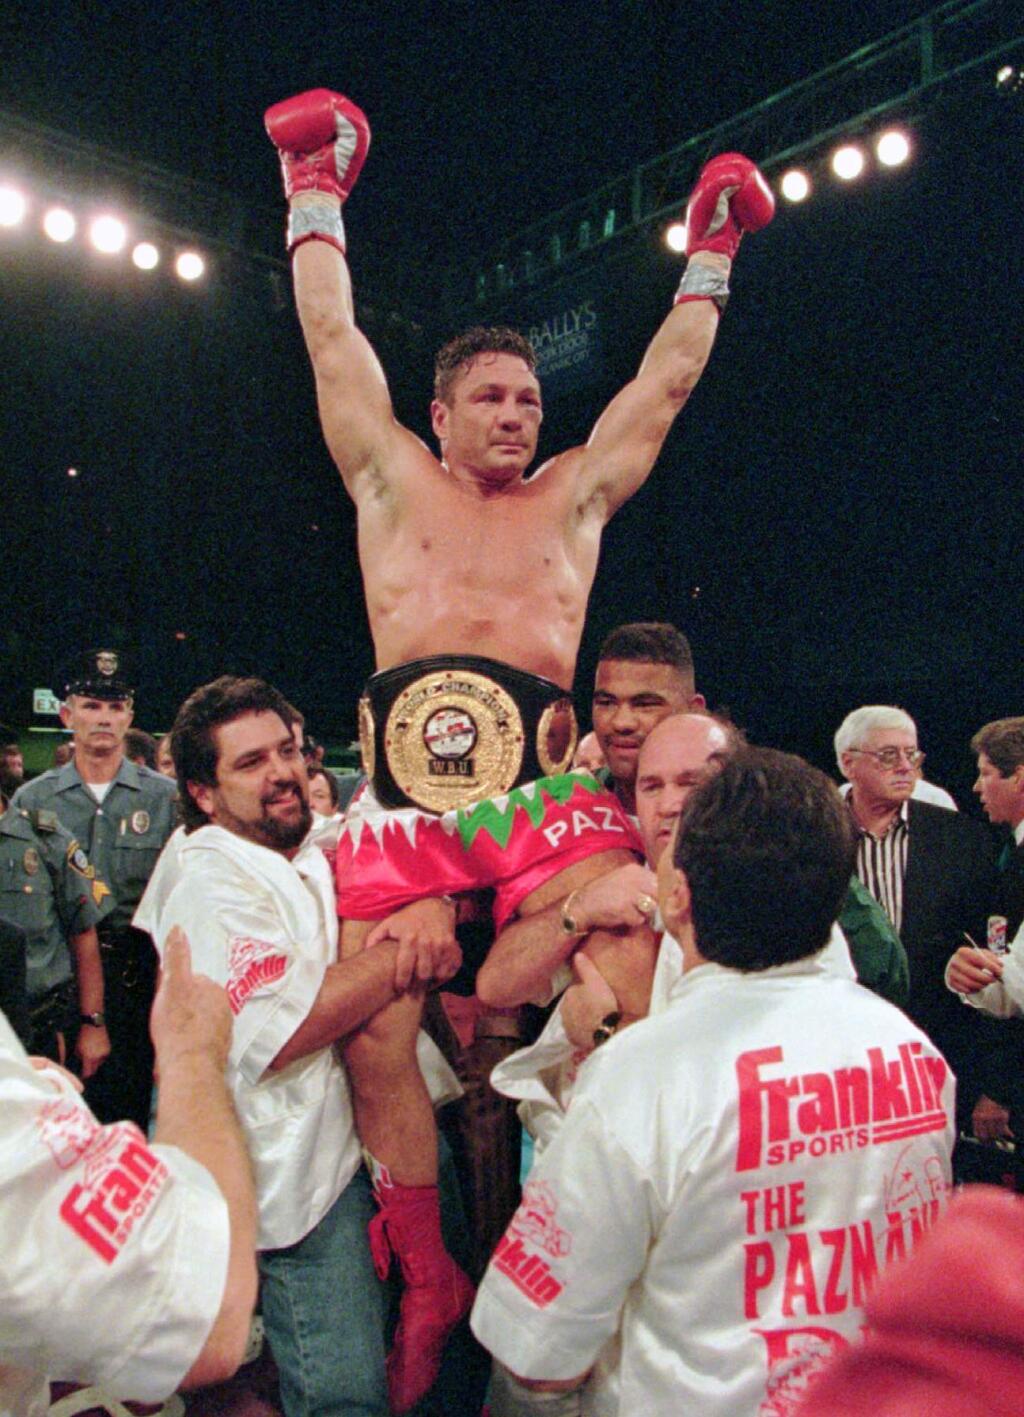 FILE - In this Aug. 23, 1996 file photo, boxer Vinny Pazienza, of Providence, R.I., is lifted up after winning a 12 round WBU super middleweight title bout against Dana Rosenblatt in Atlantic City, N.J. A new film, 'Bleed For This,' based on Pazienza's life, opens November 18. (AP Photo/Bill Borrelli, File)